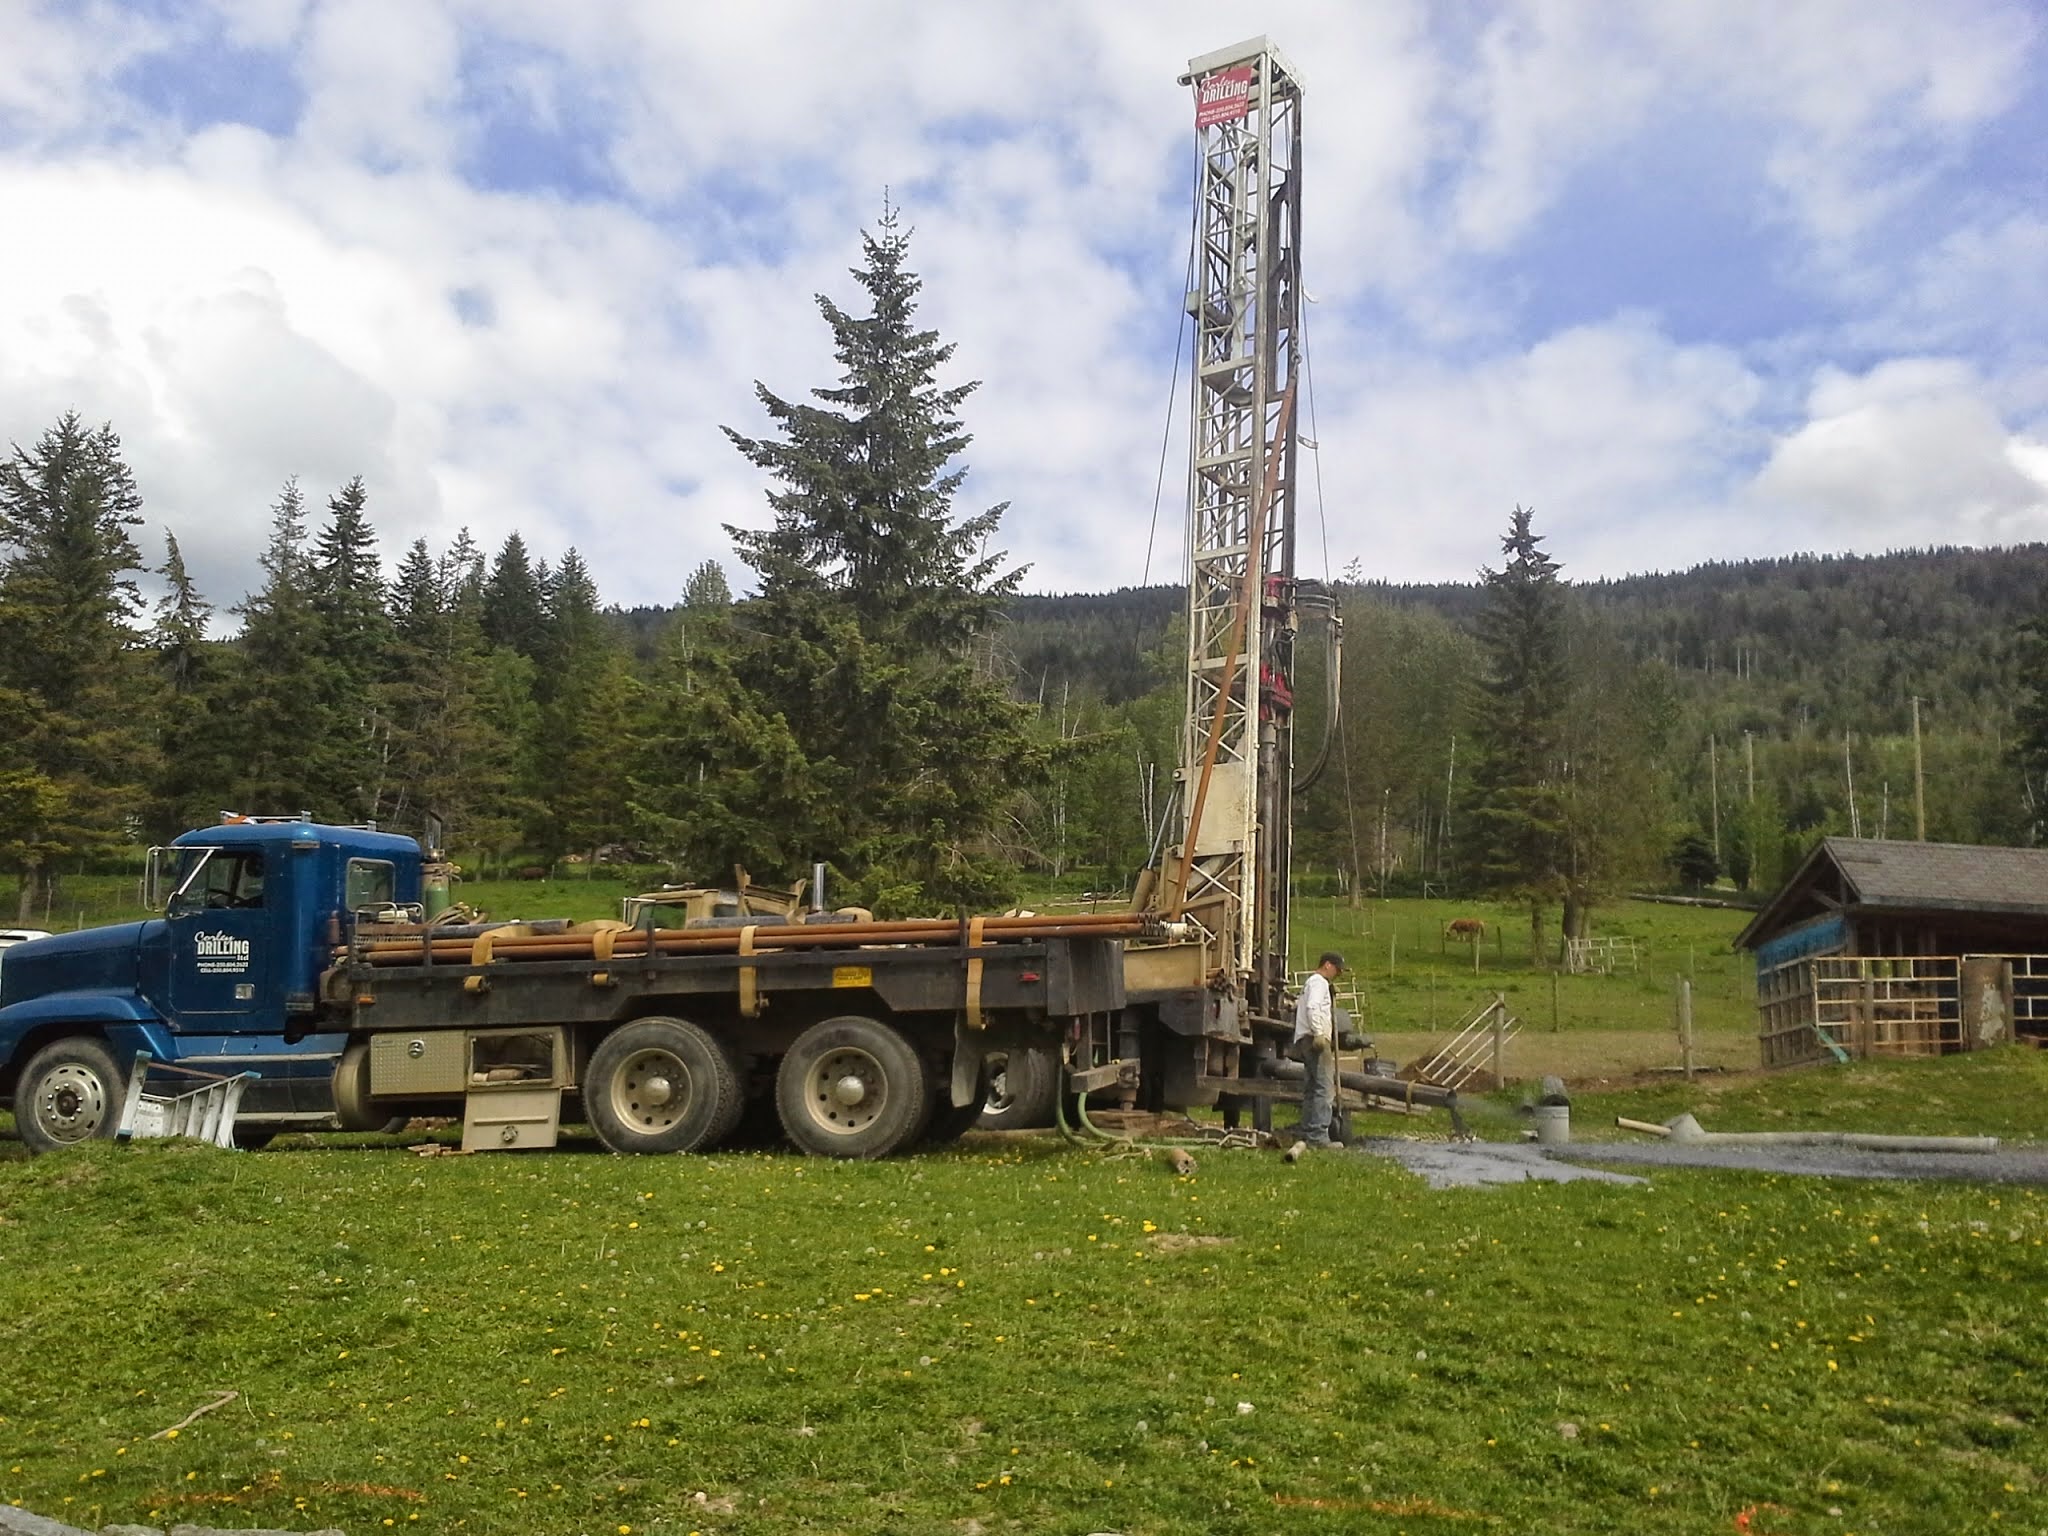 Corley Drilling drill rig on site in operation in the Shuswap